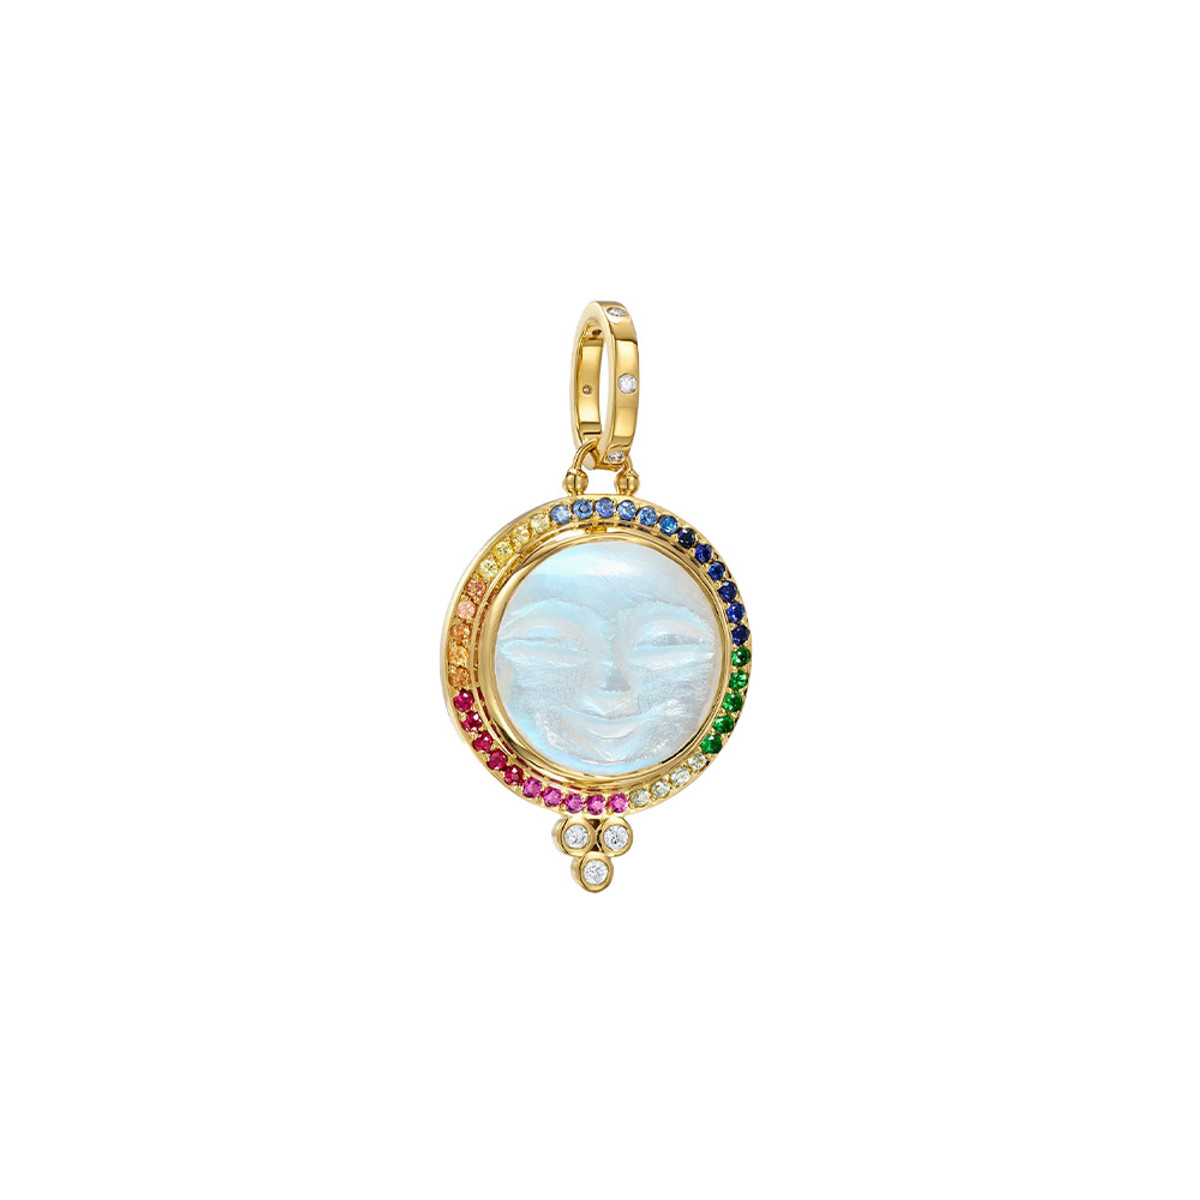 Temple St. Clair 18K Yellow Gold Rainbow Moonface Pendant-61437 Product Image